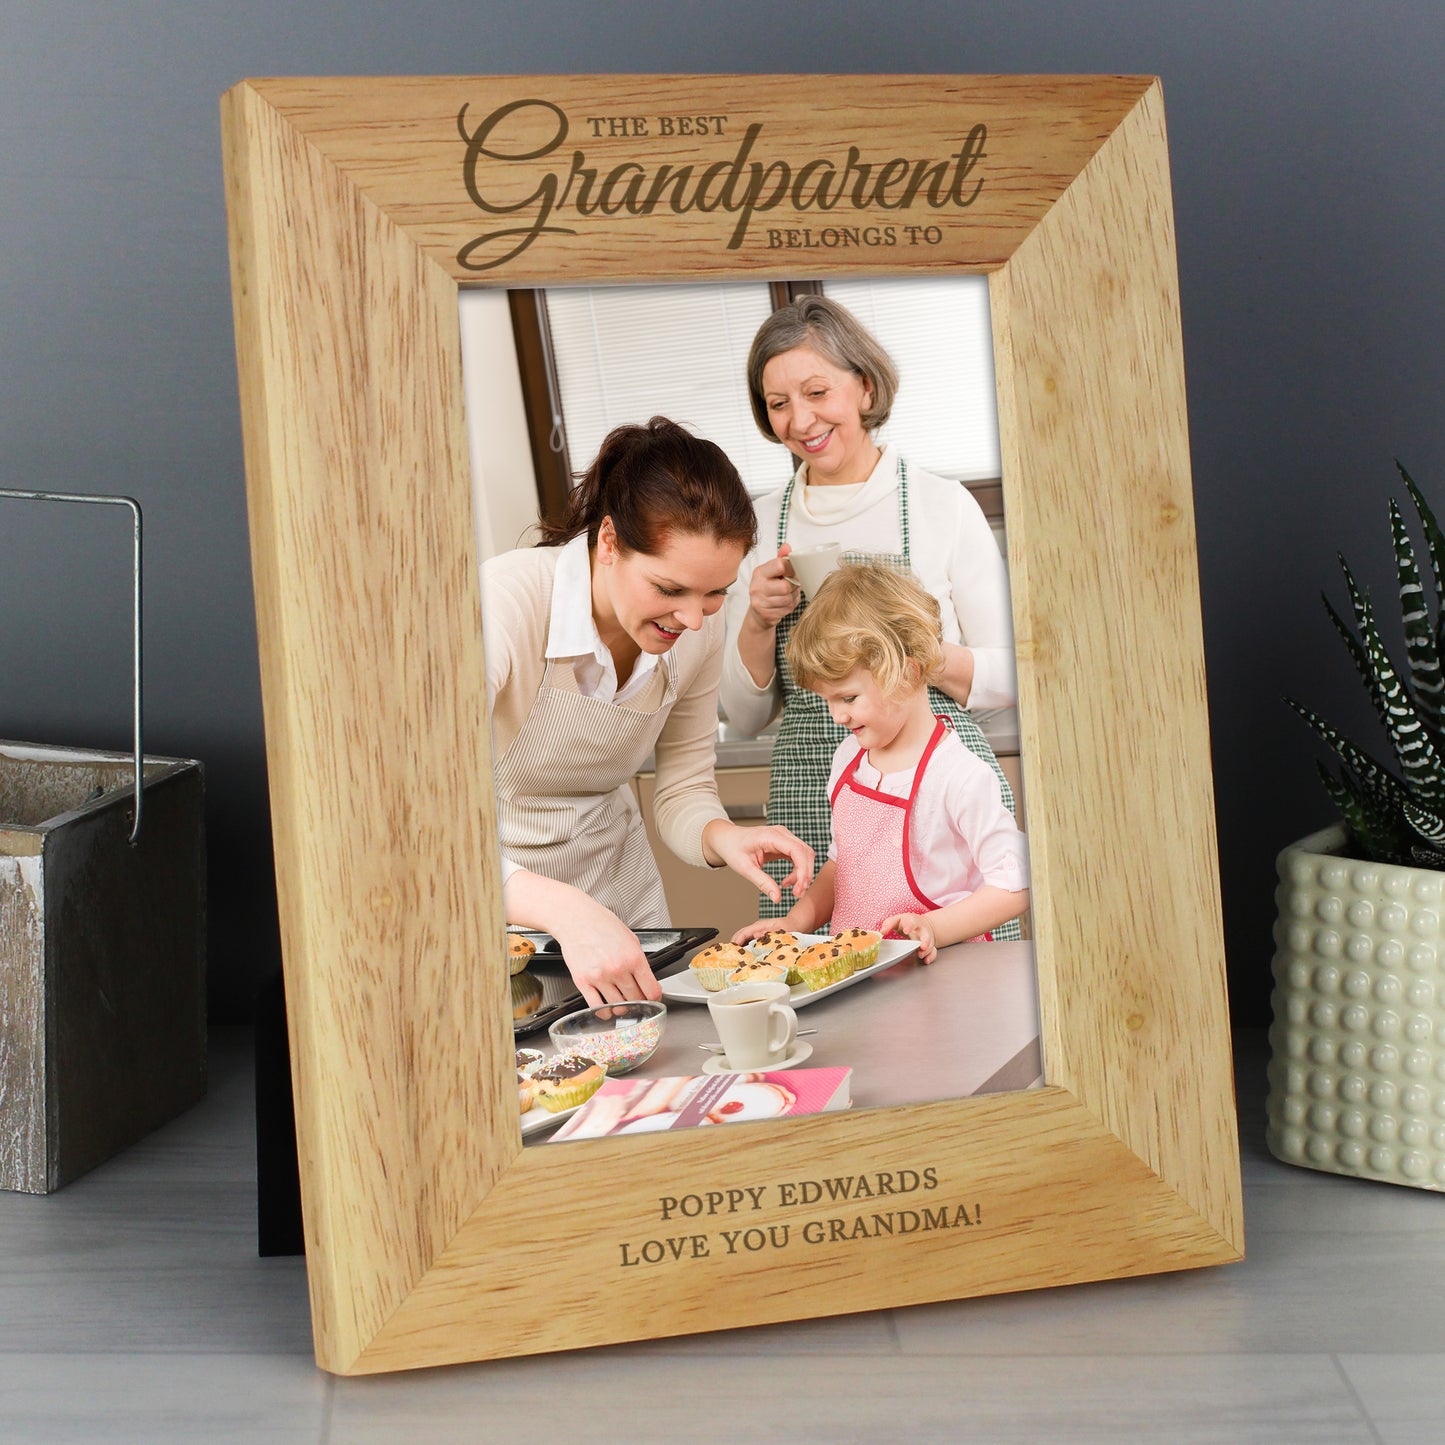 Personalised The Best Grandparent 5x7 Wooden Photo Frame